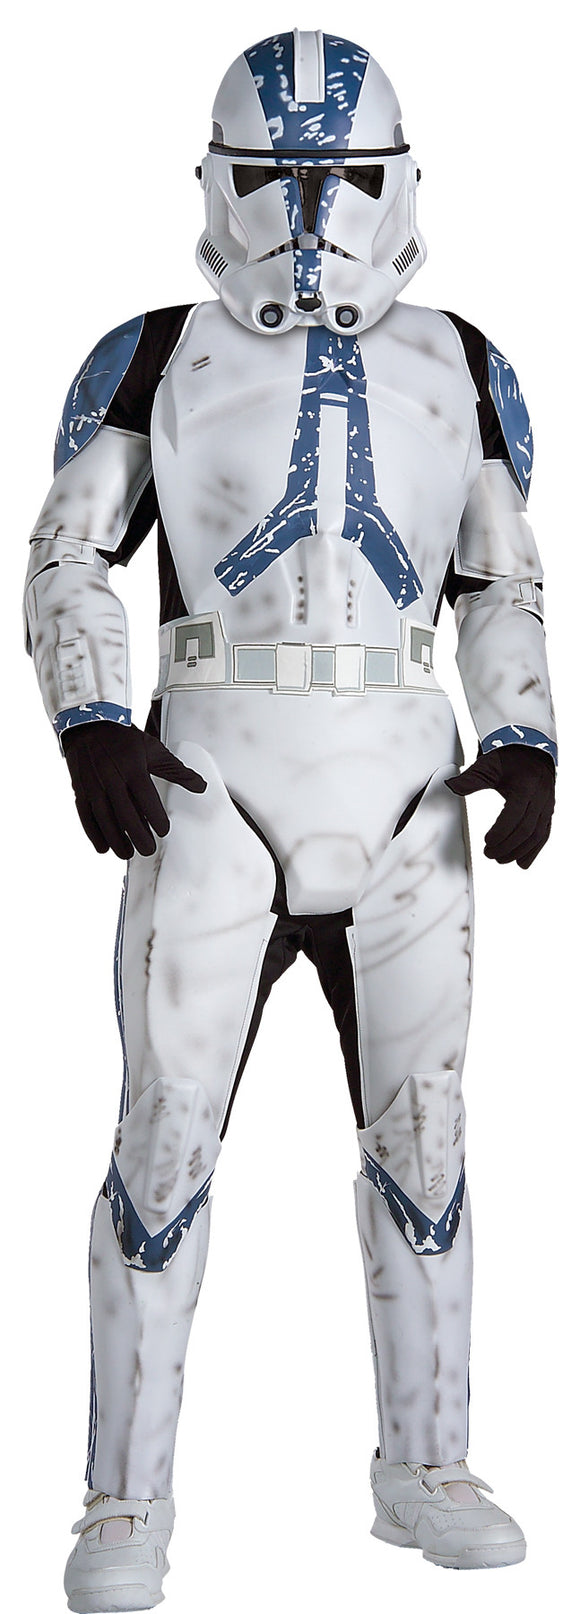 Star Wars Clonetrooper Deluxe Child Boy's Costume - Small 4-6